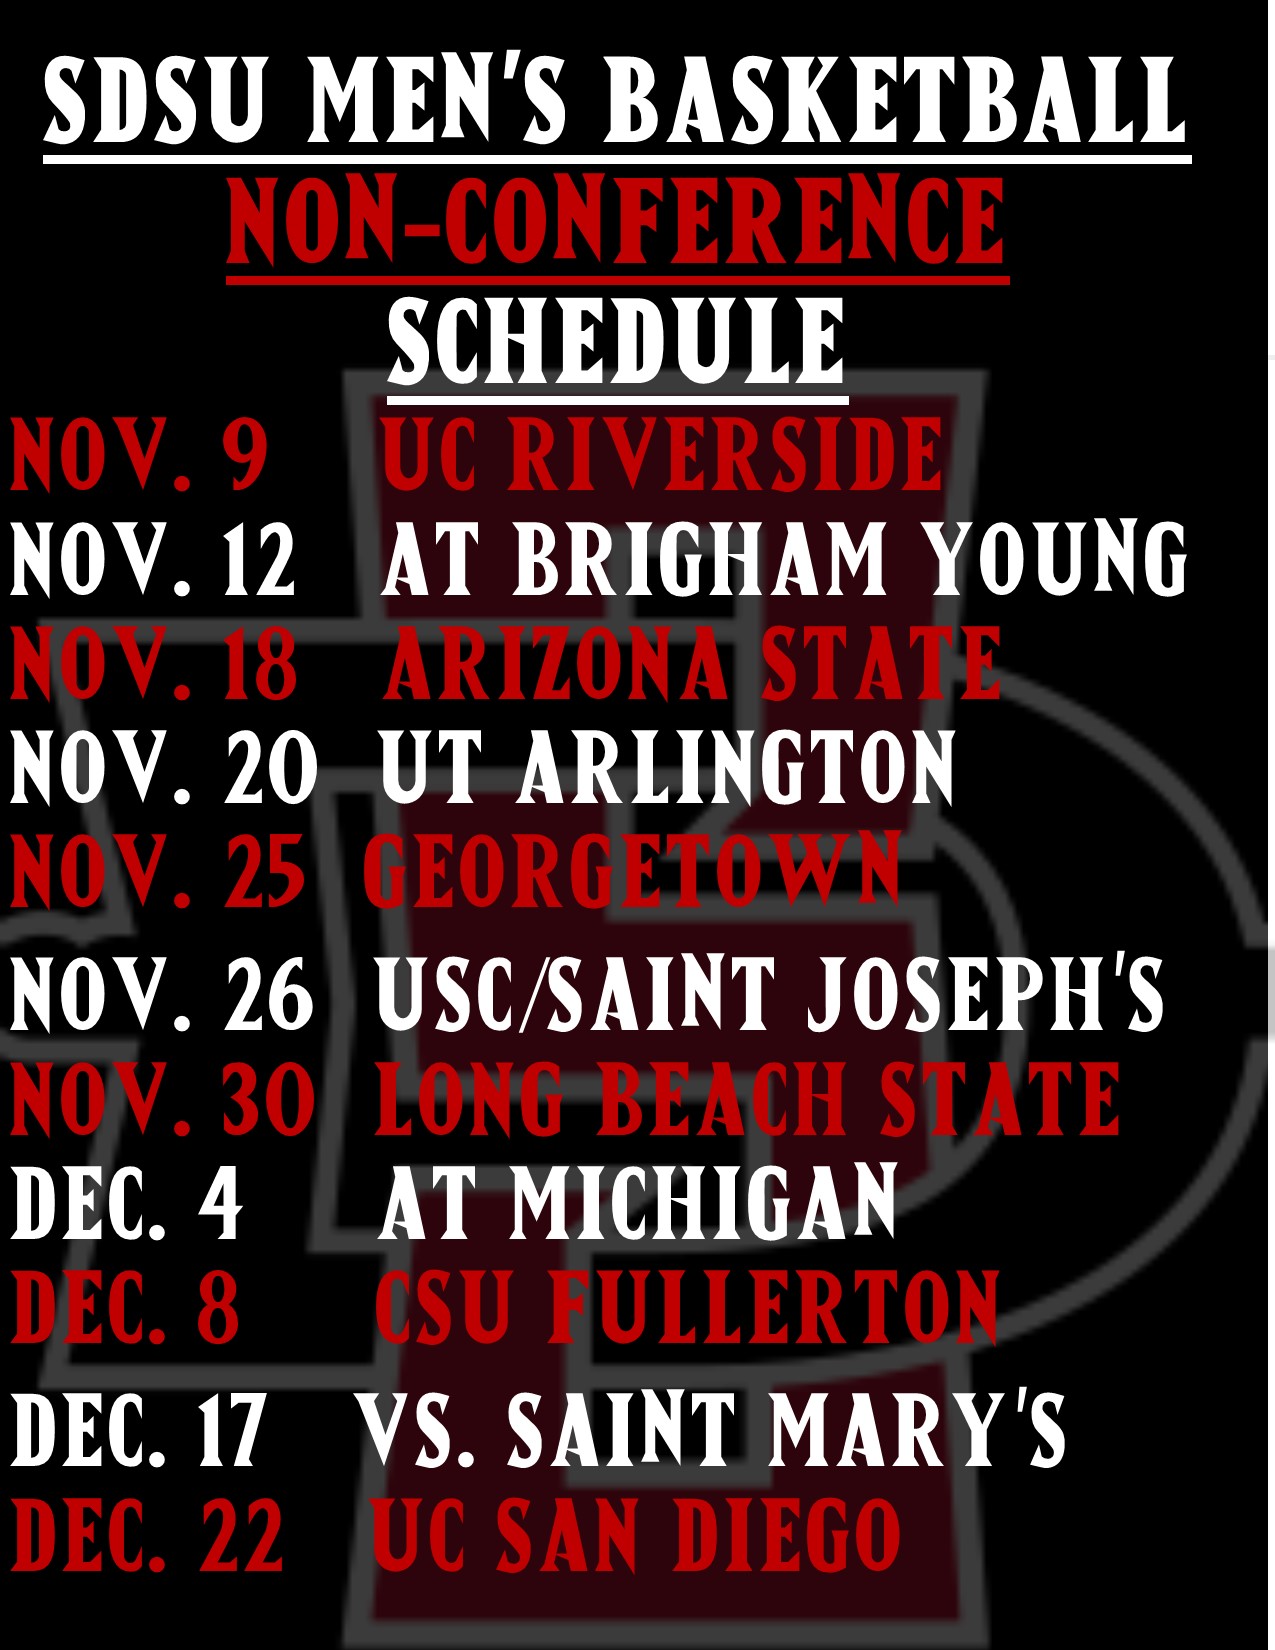 First look at SDSU Men’s Basketball NonConference Schedule